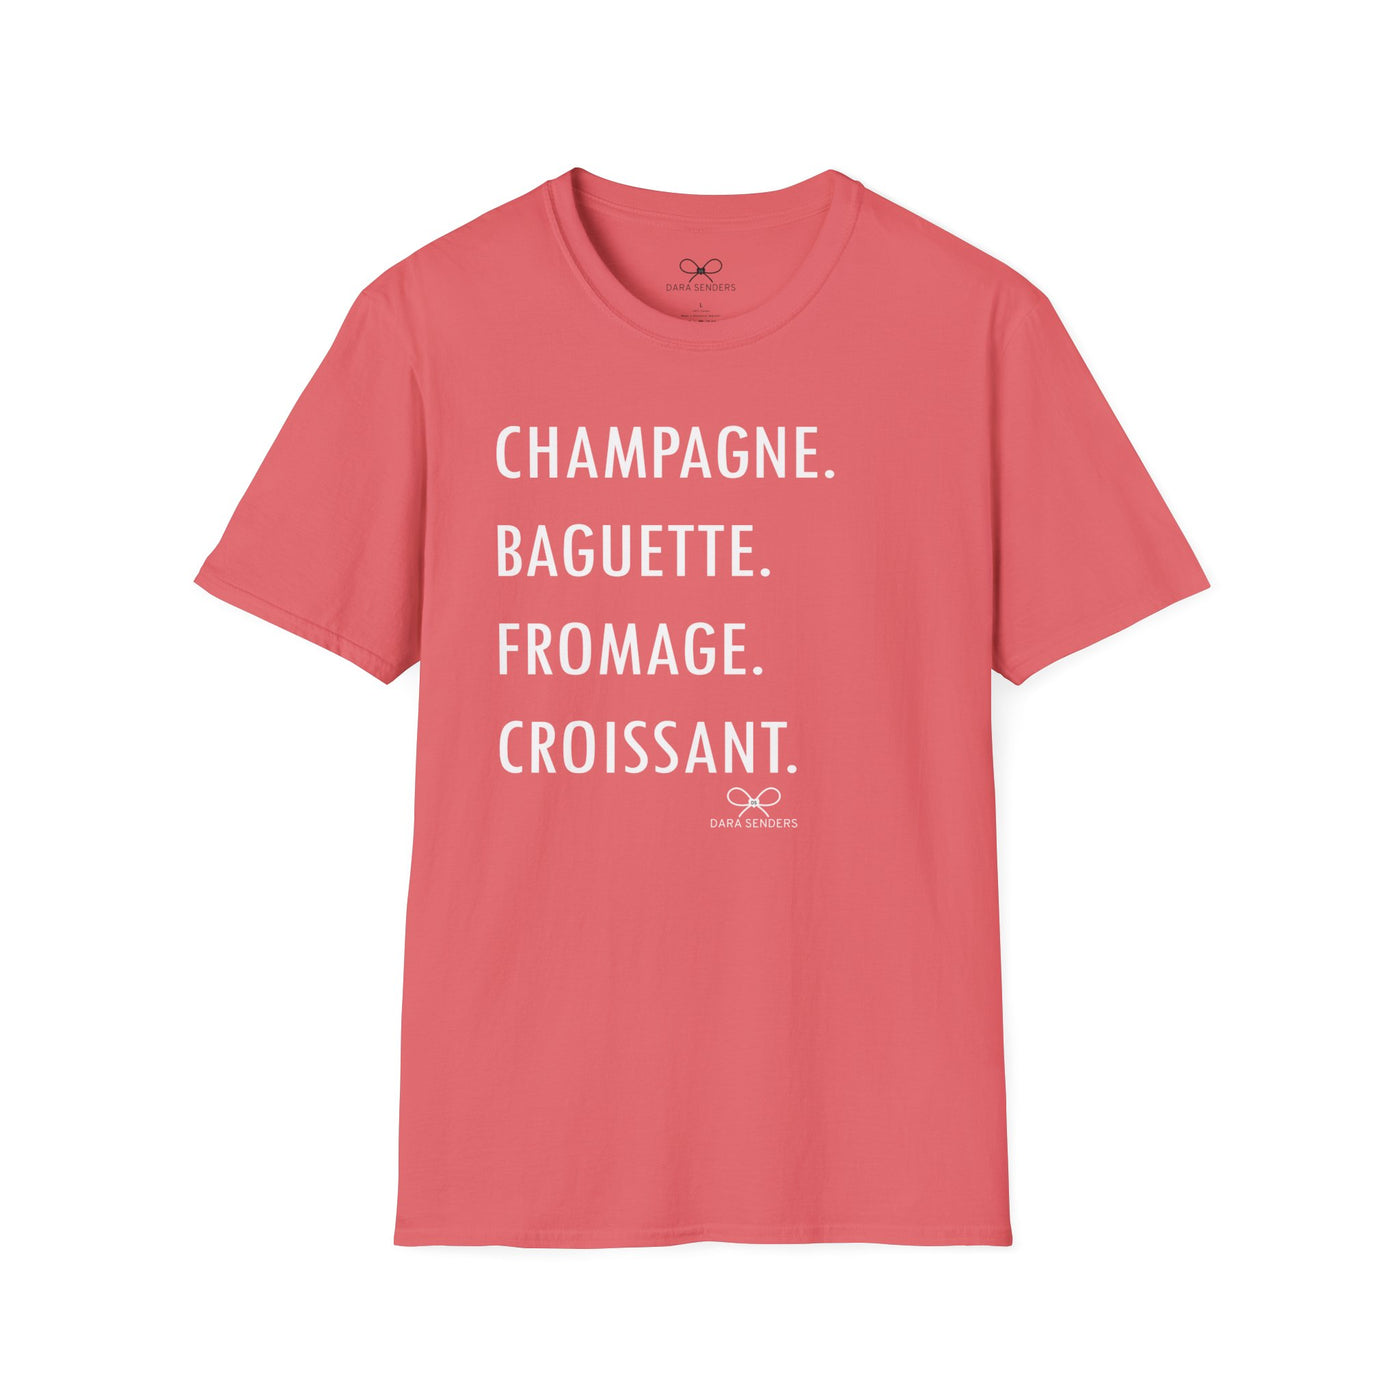 GOURMET LOVE (Champagne, Baguette, Fromage, Croissant) Tshirt